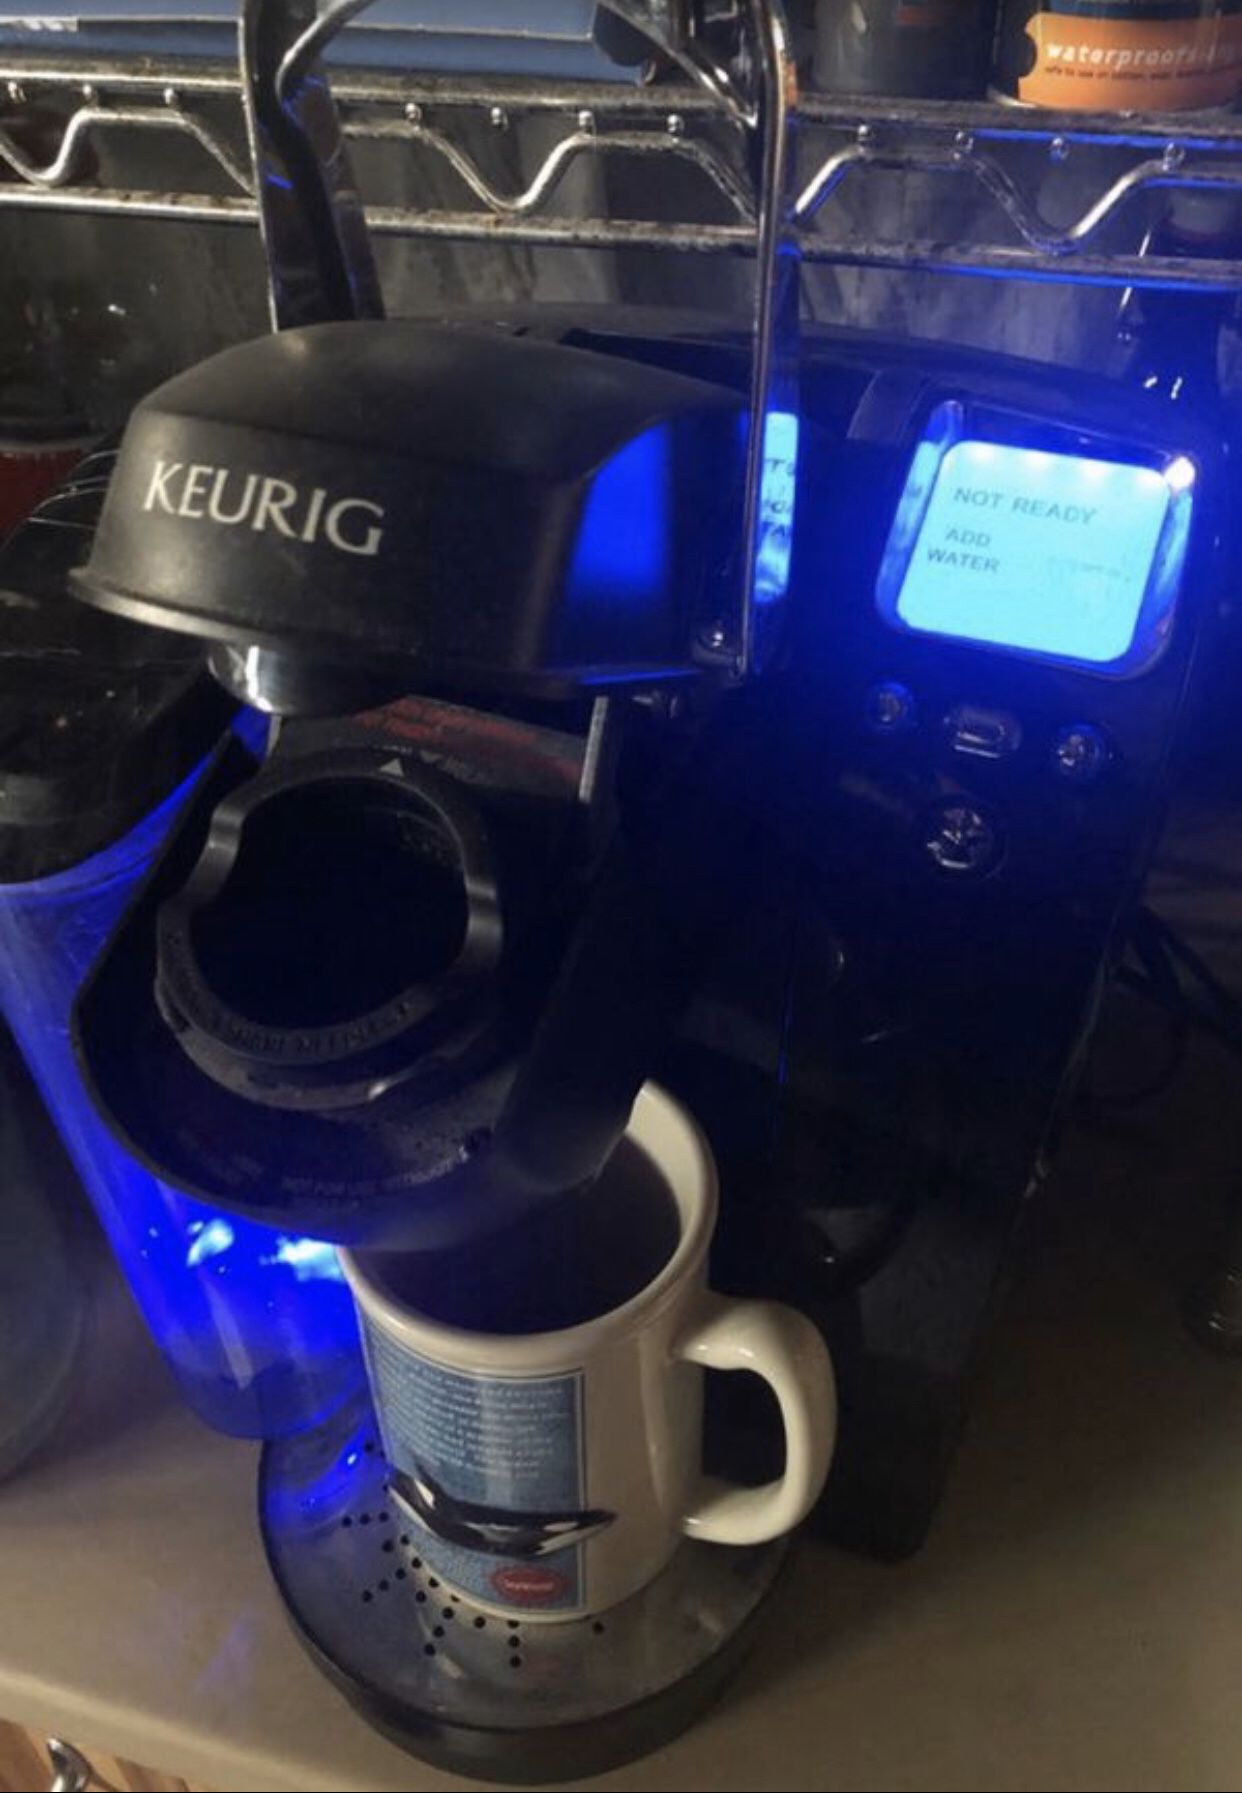 Keurig K70 1 cup Brewing system with Carousel 27